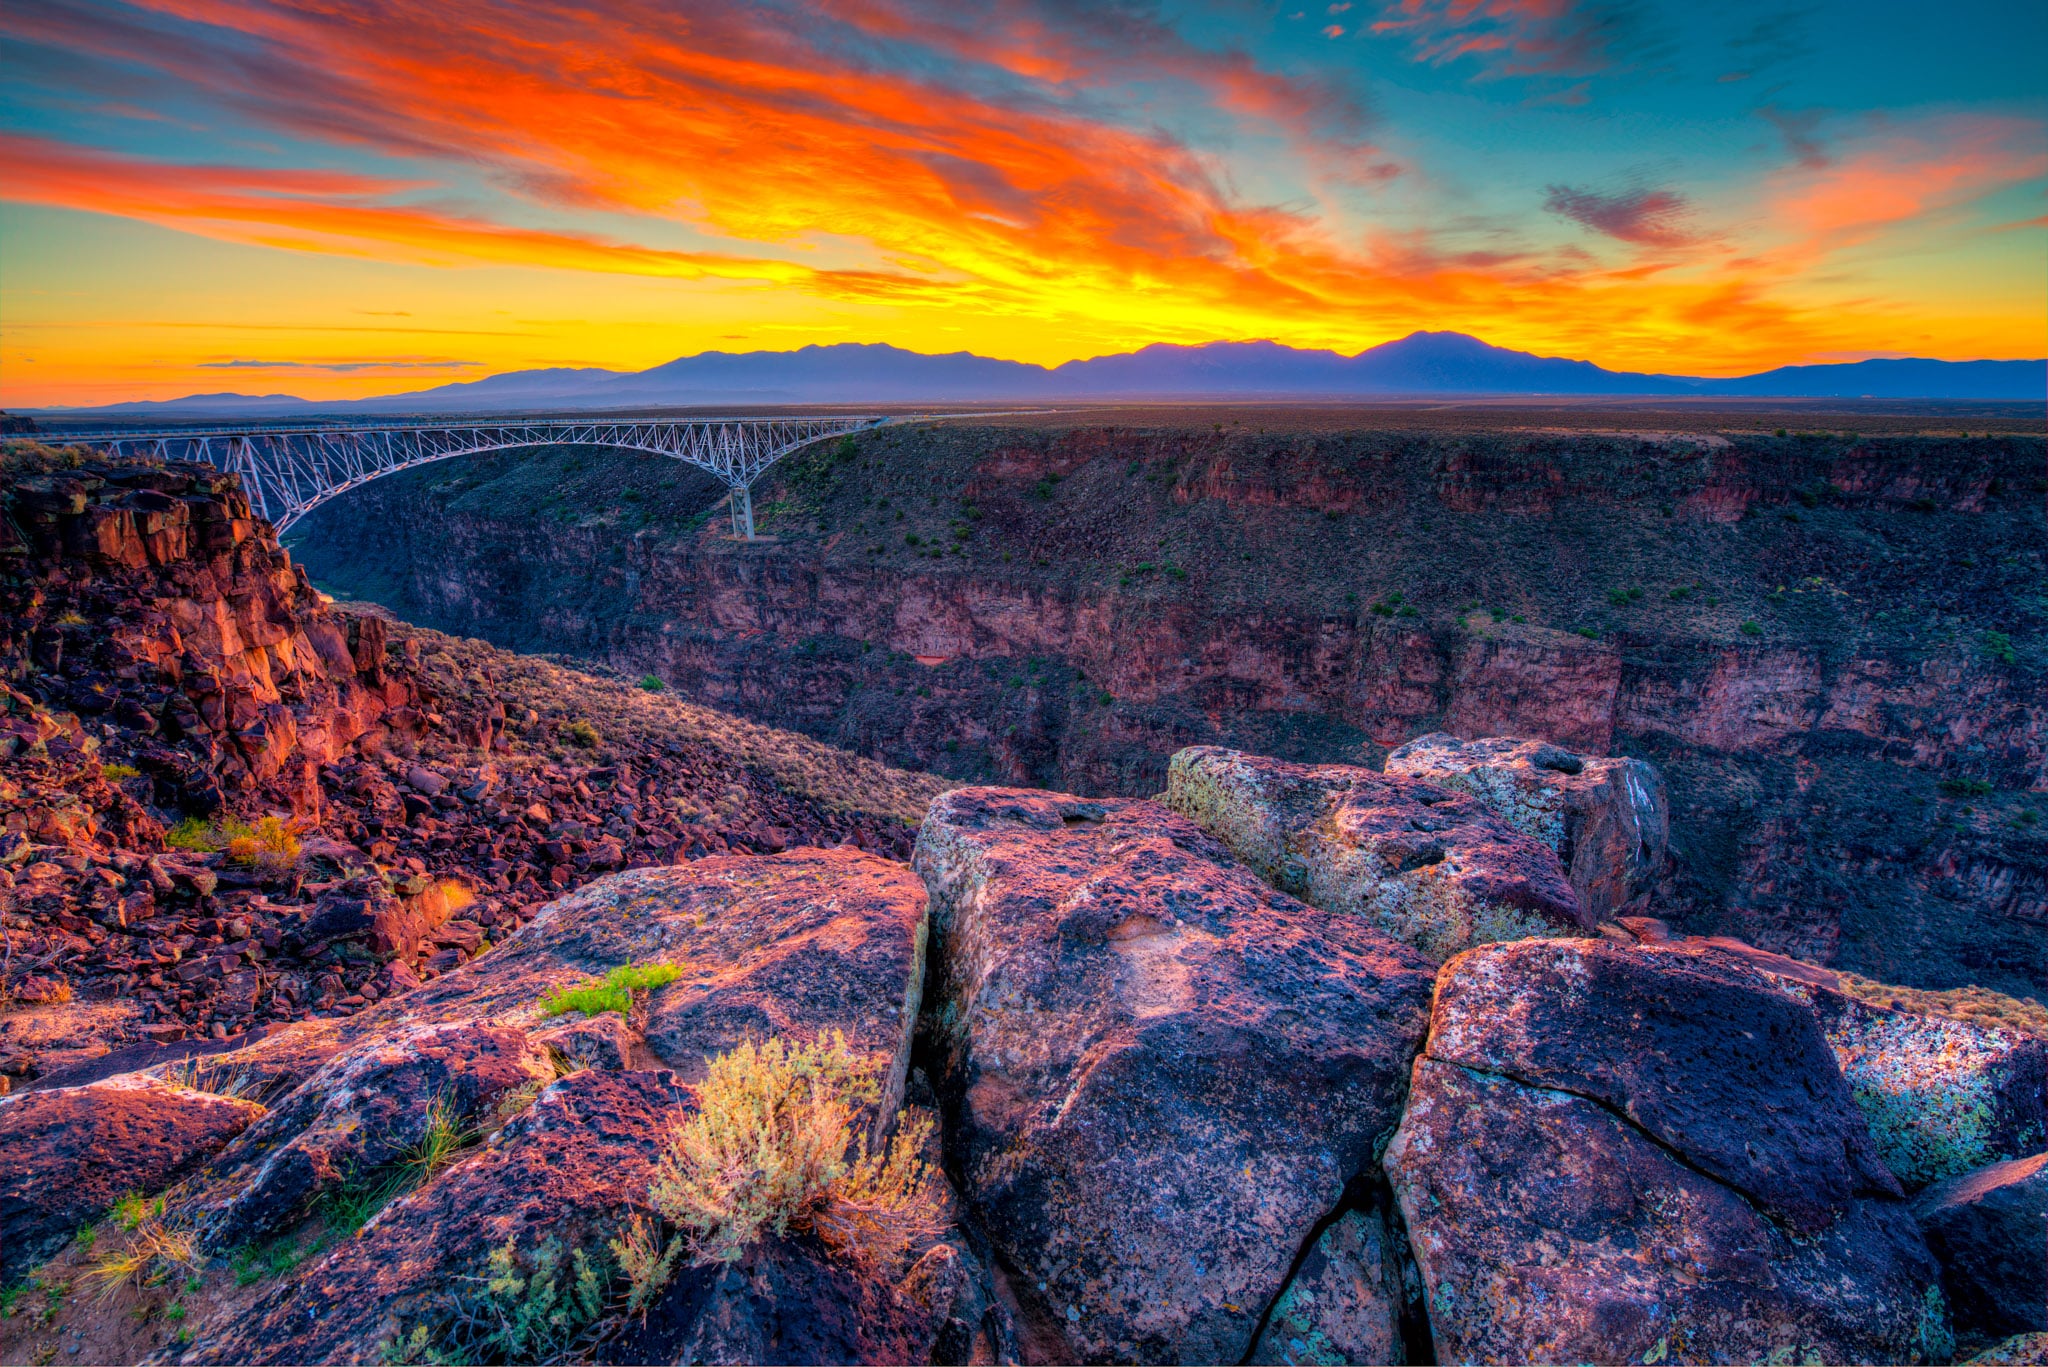 The Rio Grande Gorge at sunset taken from near the Rio Grande Gorge Bridge outside of Taos, New Mexico.